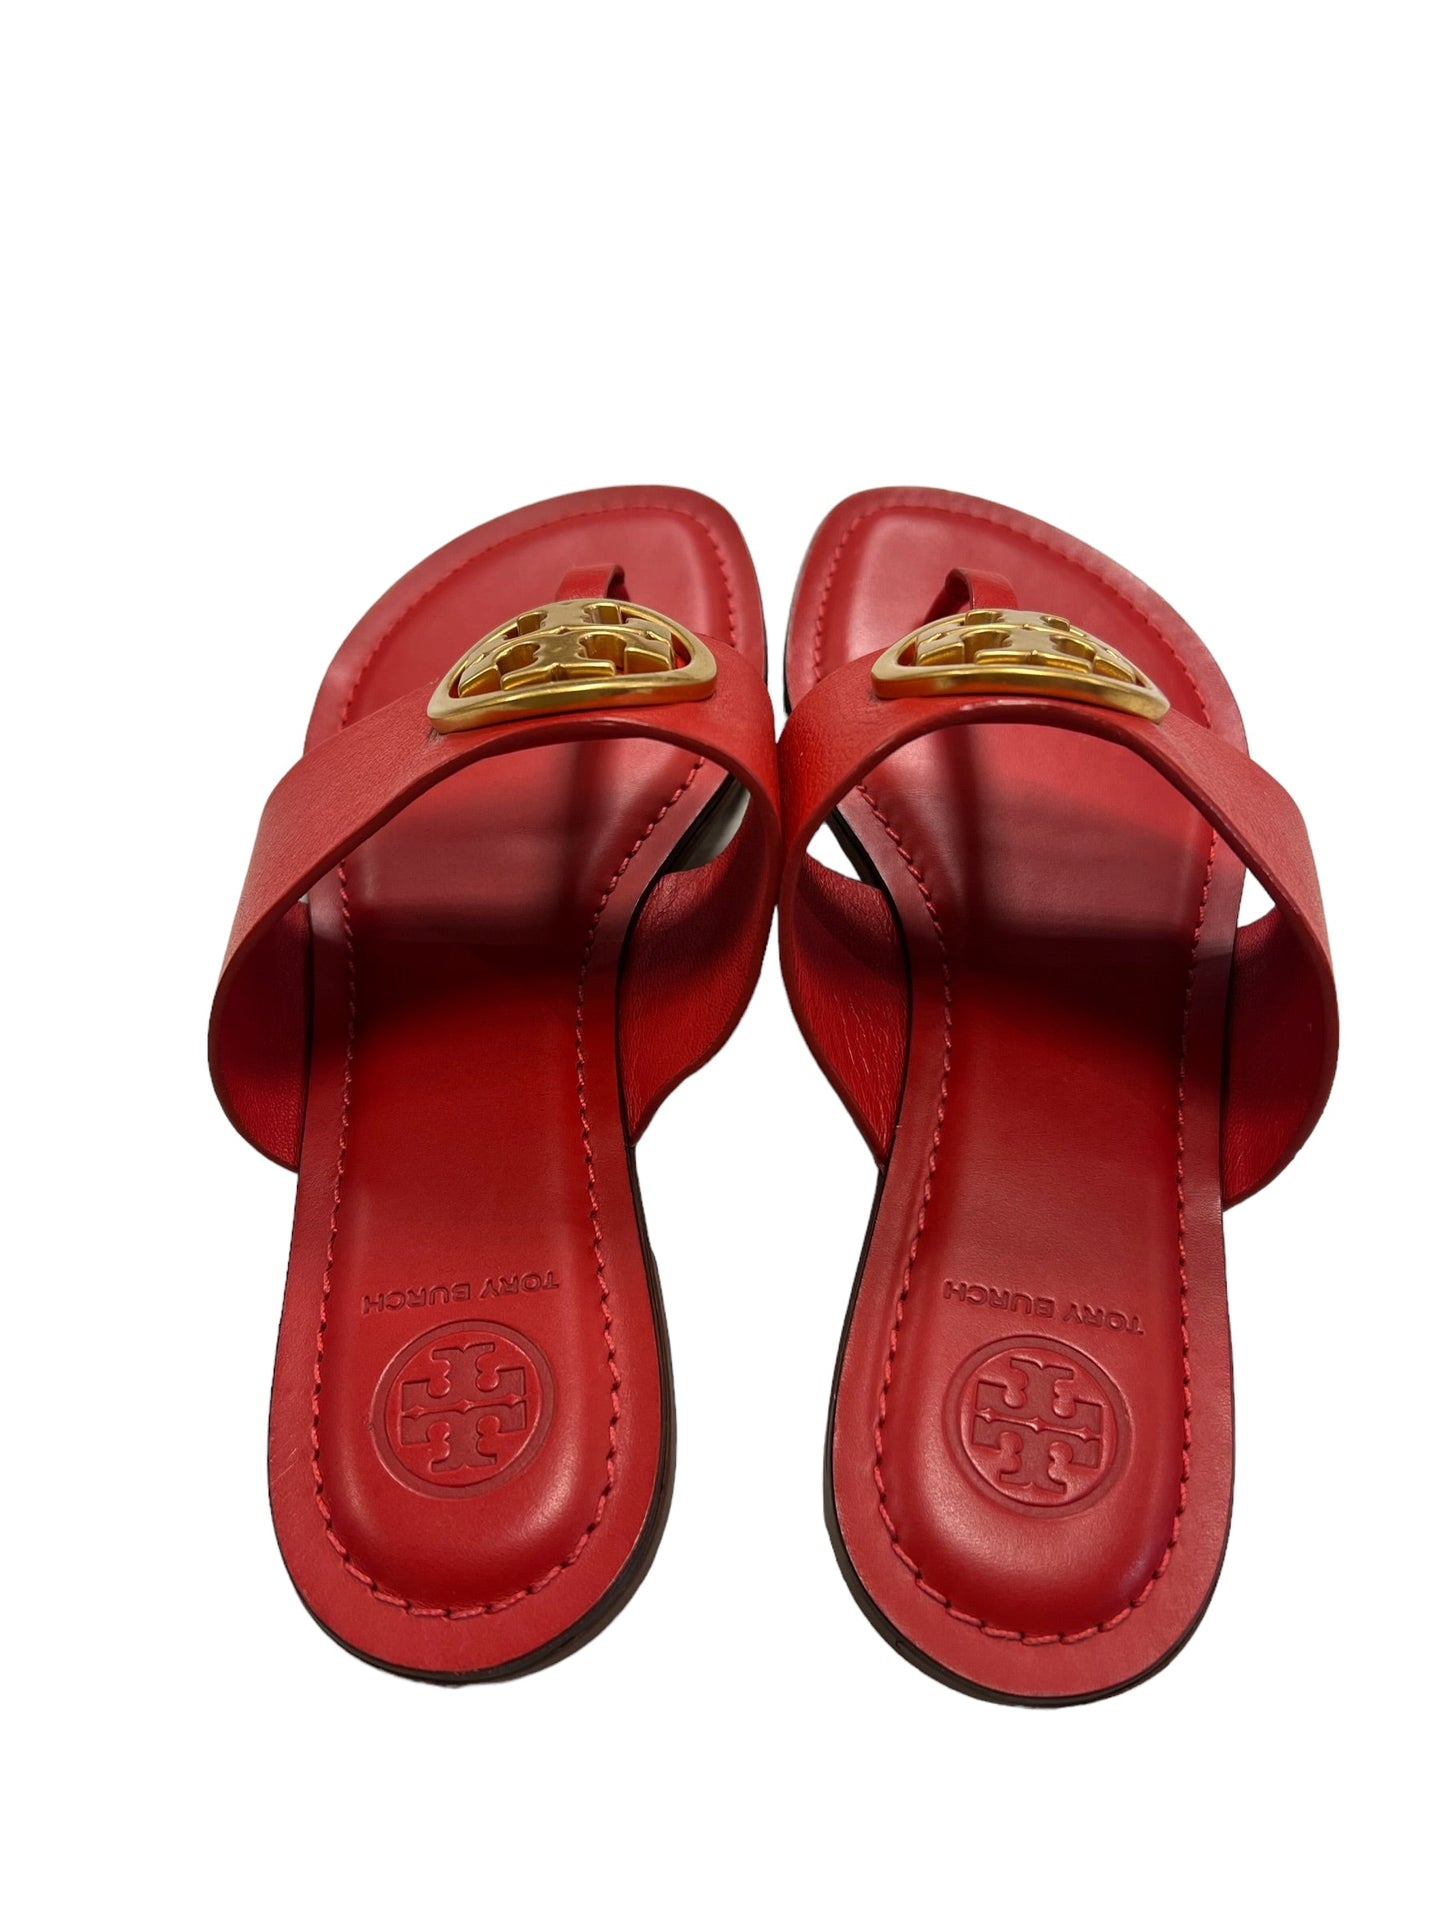 Sandals Designer By Tory Burch  Size: 6.5